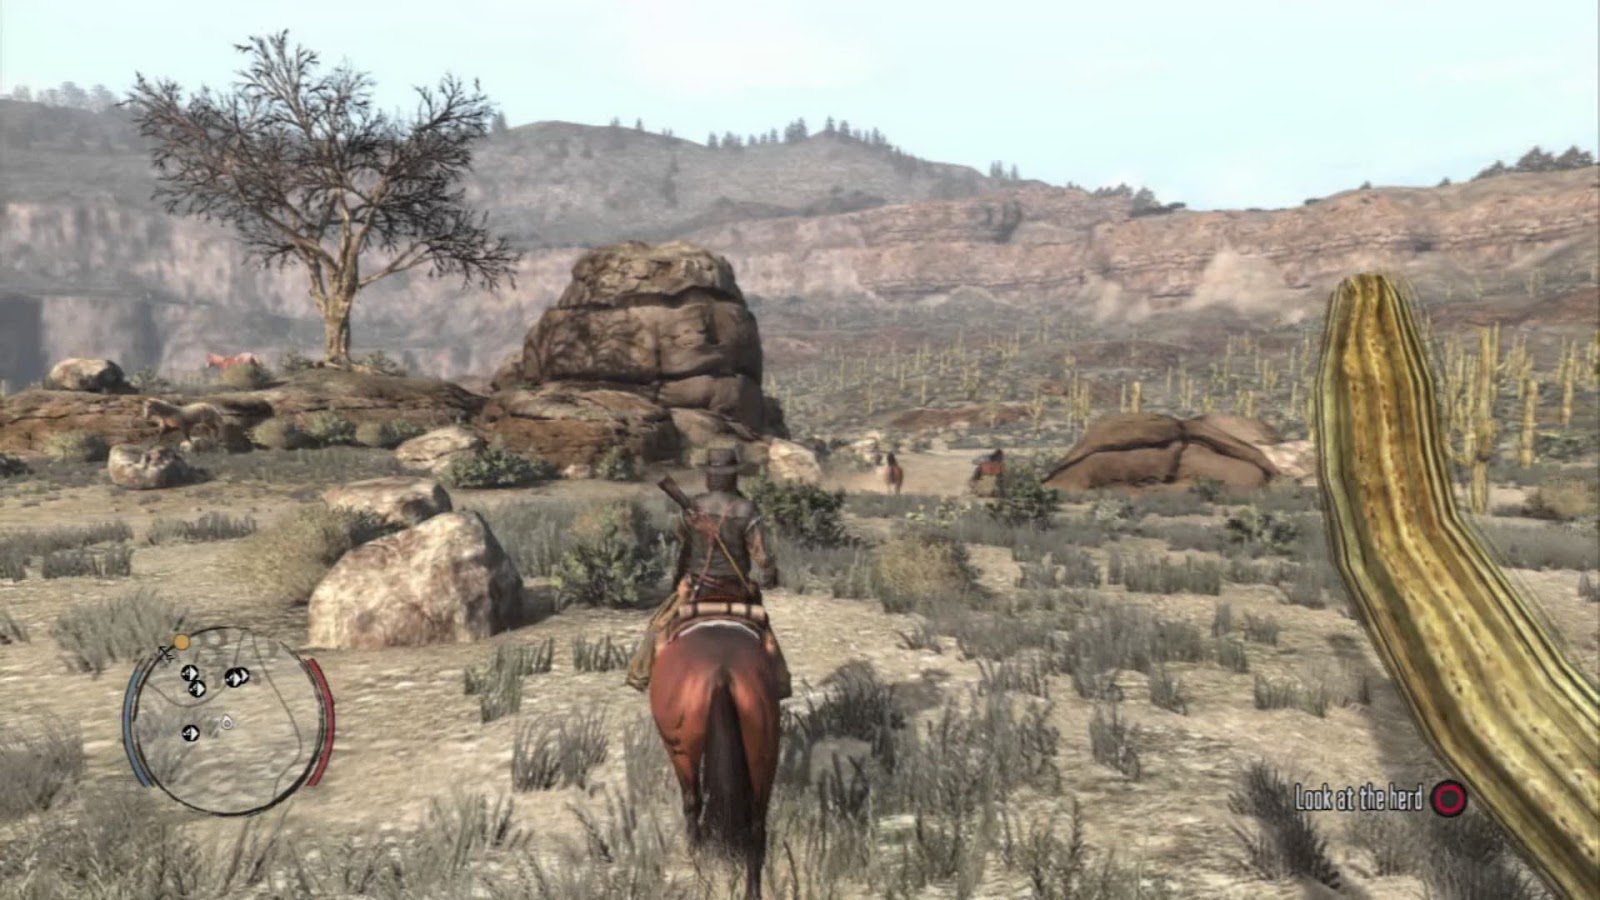 download red dead redemption free for pc